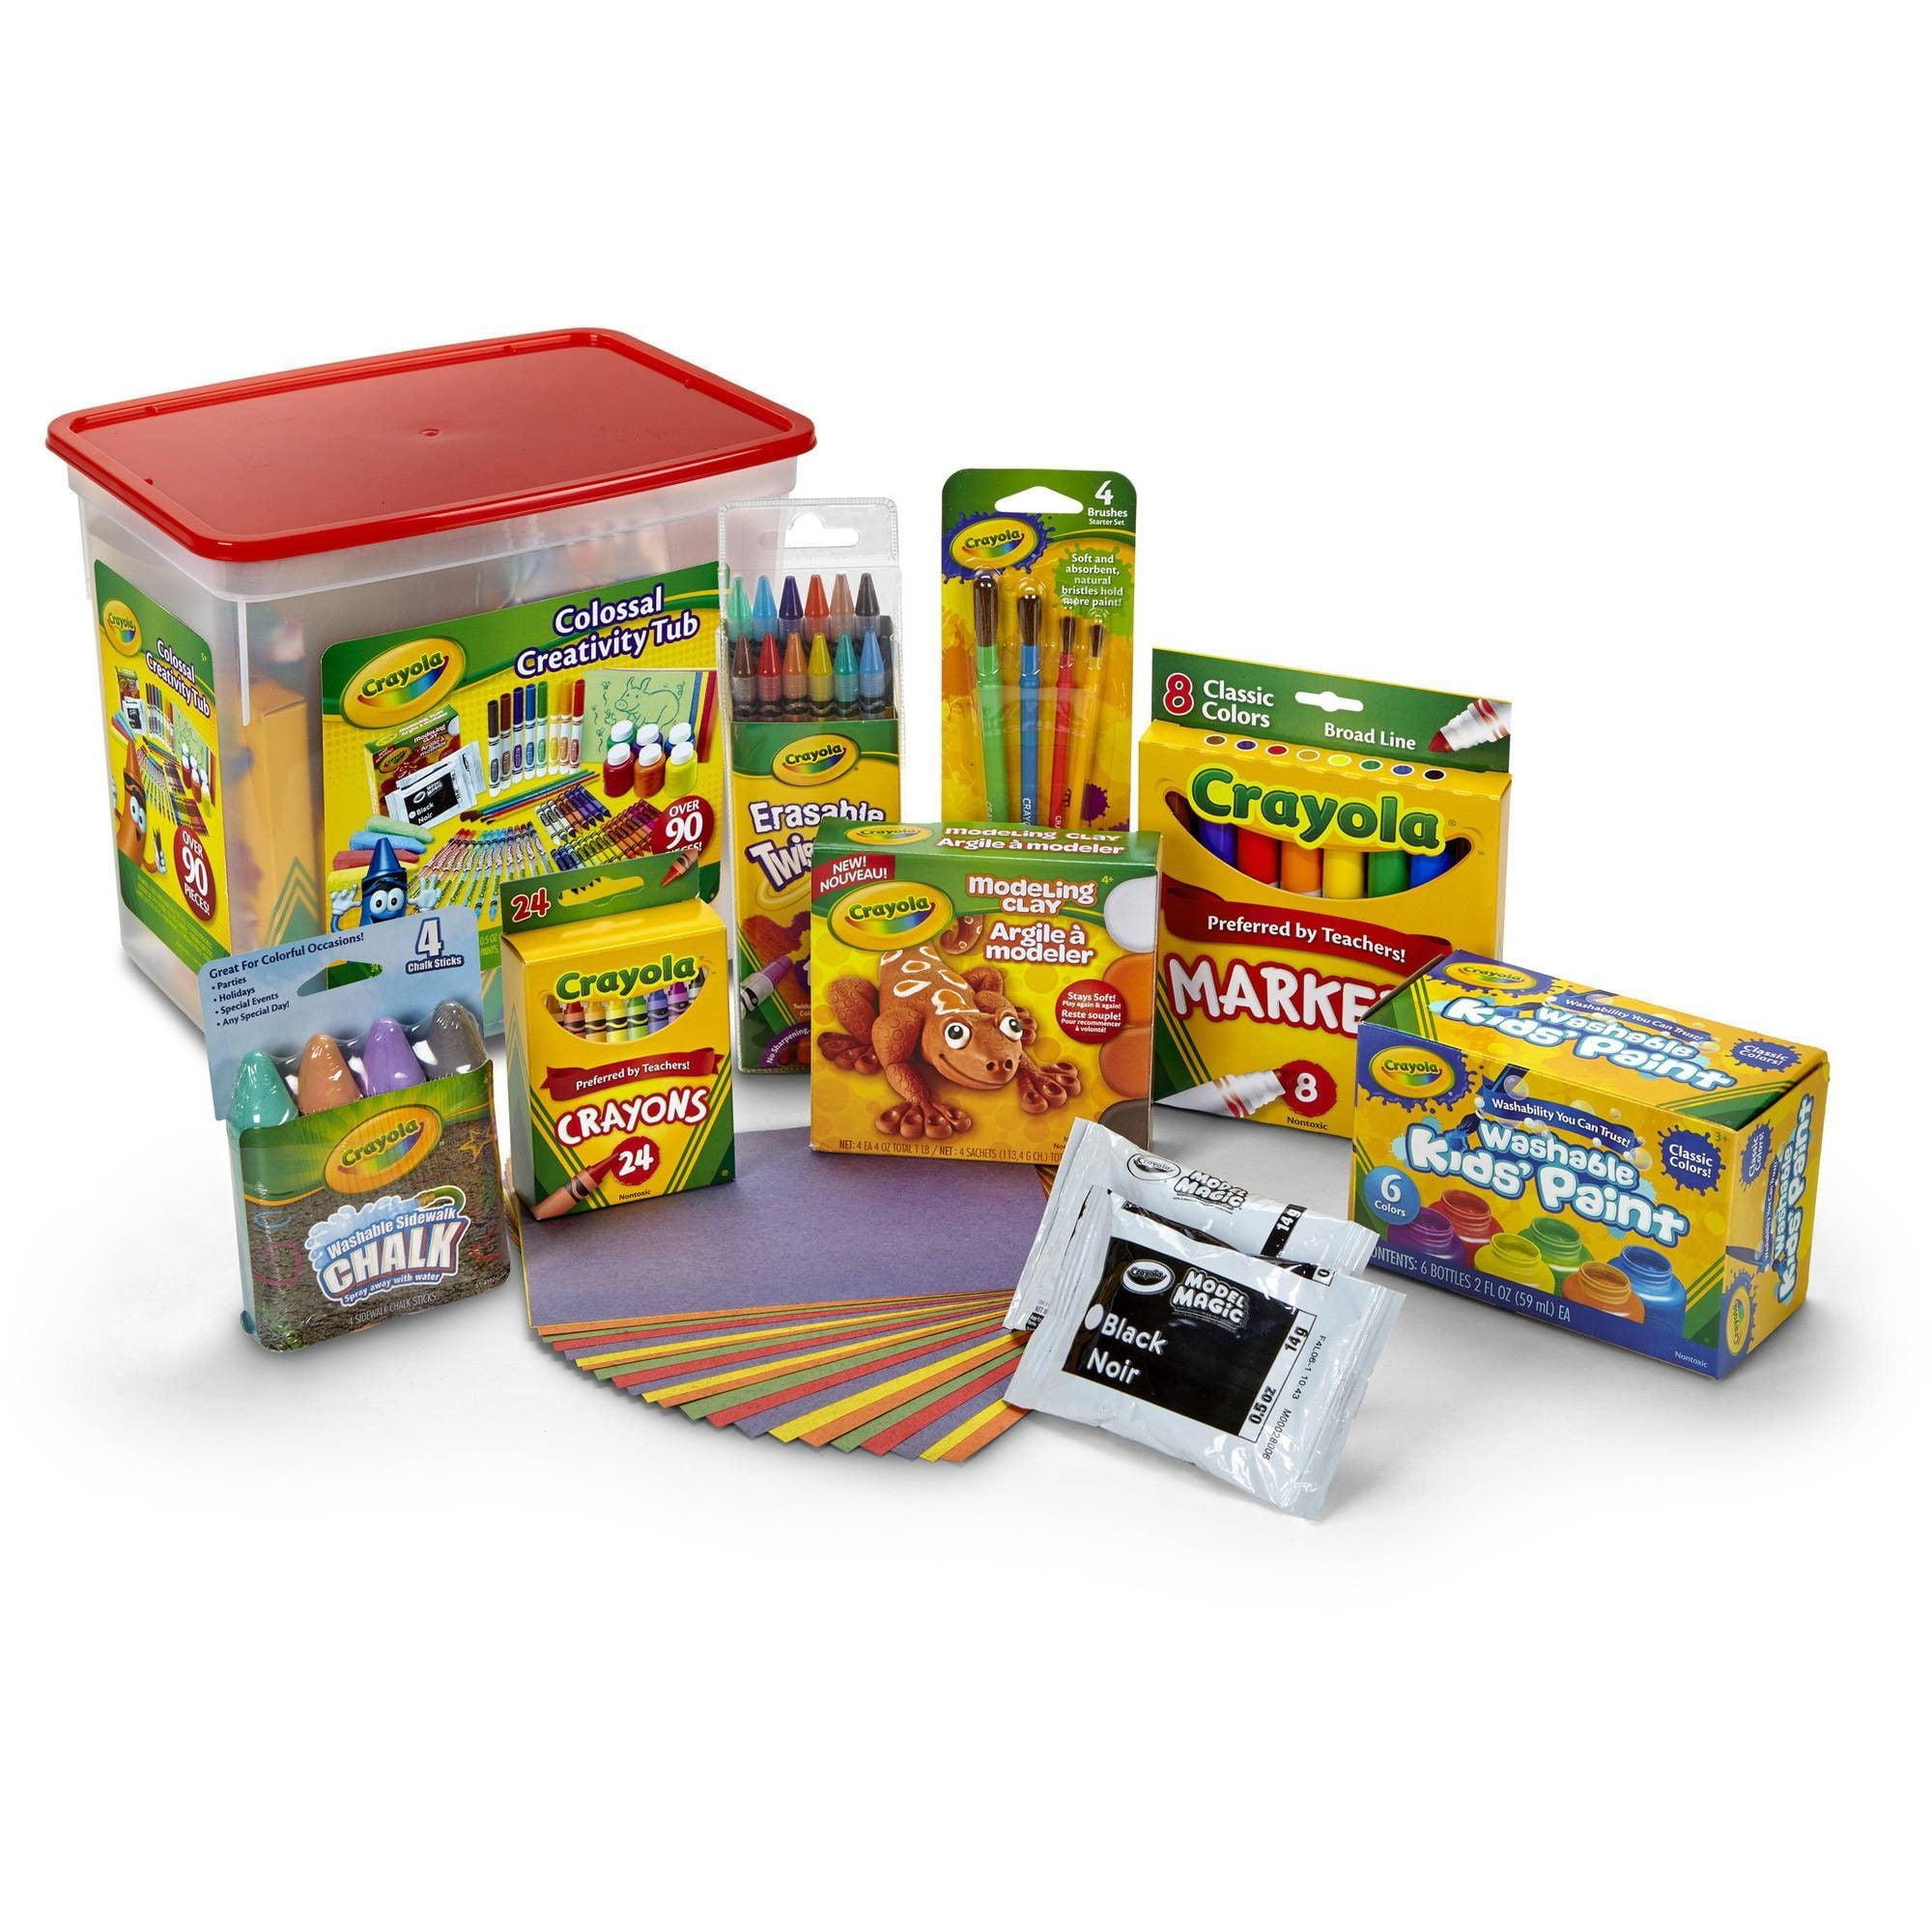 Crayola Colossal Creativity Tub, Art Set, 90 Pieces, Holiday Gift for Kids, Ages 5+